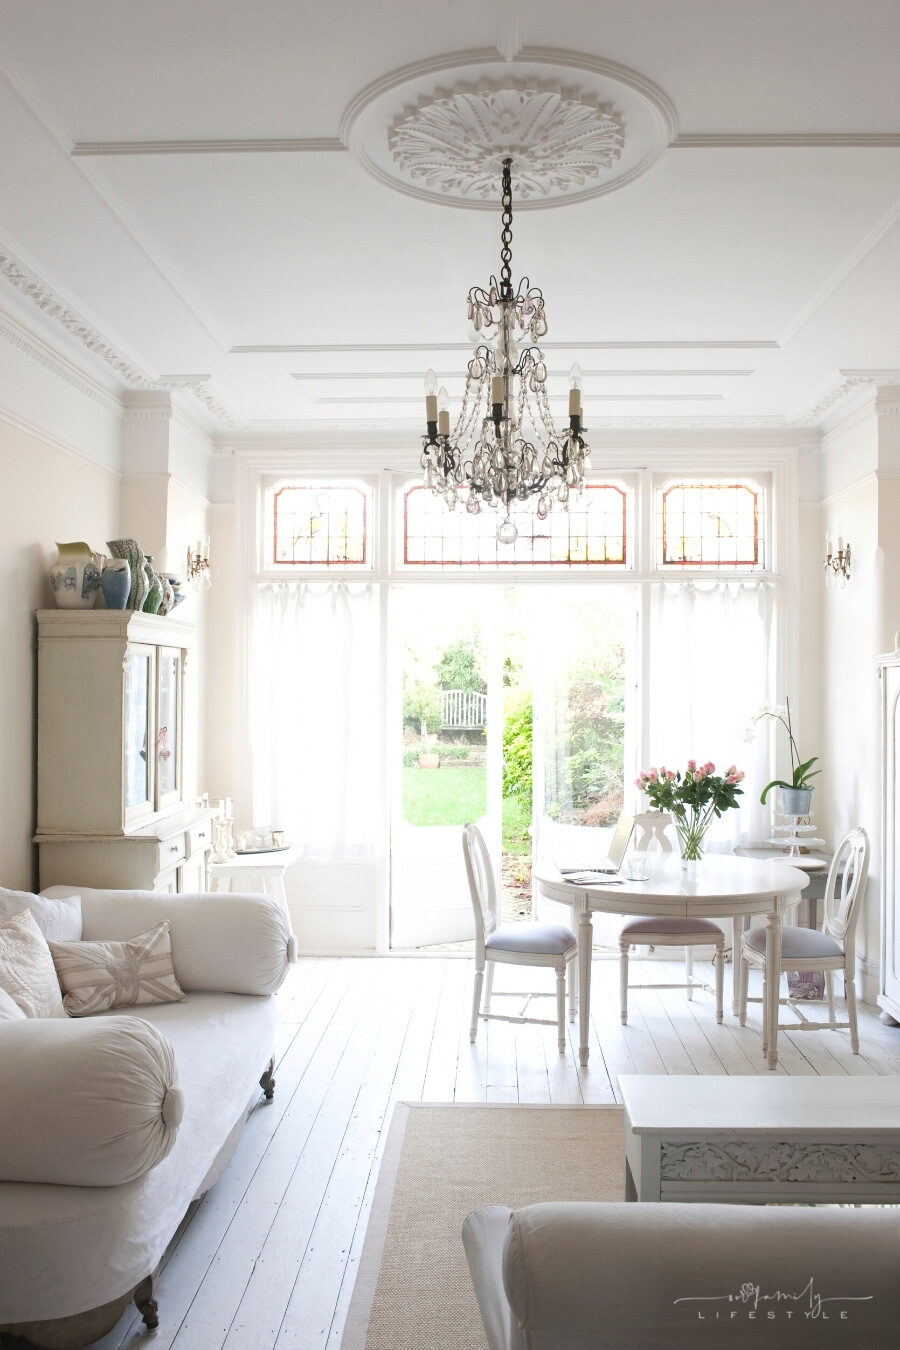 Life-Changing Home Improvements That Will Make Your Home Feel Luxurious